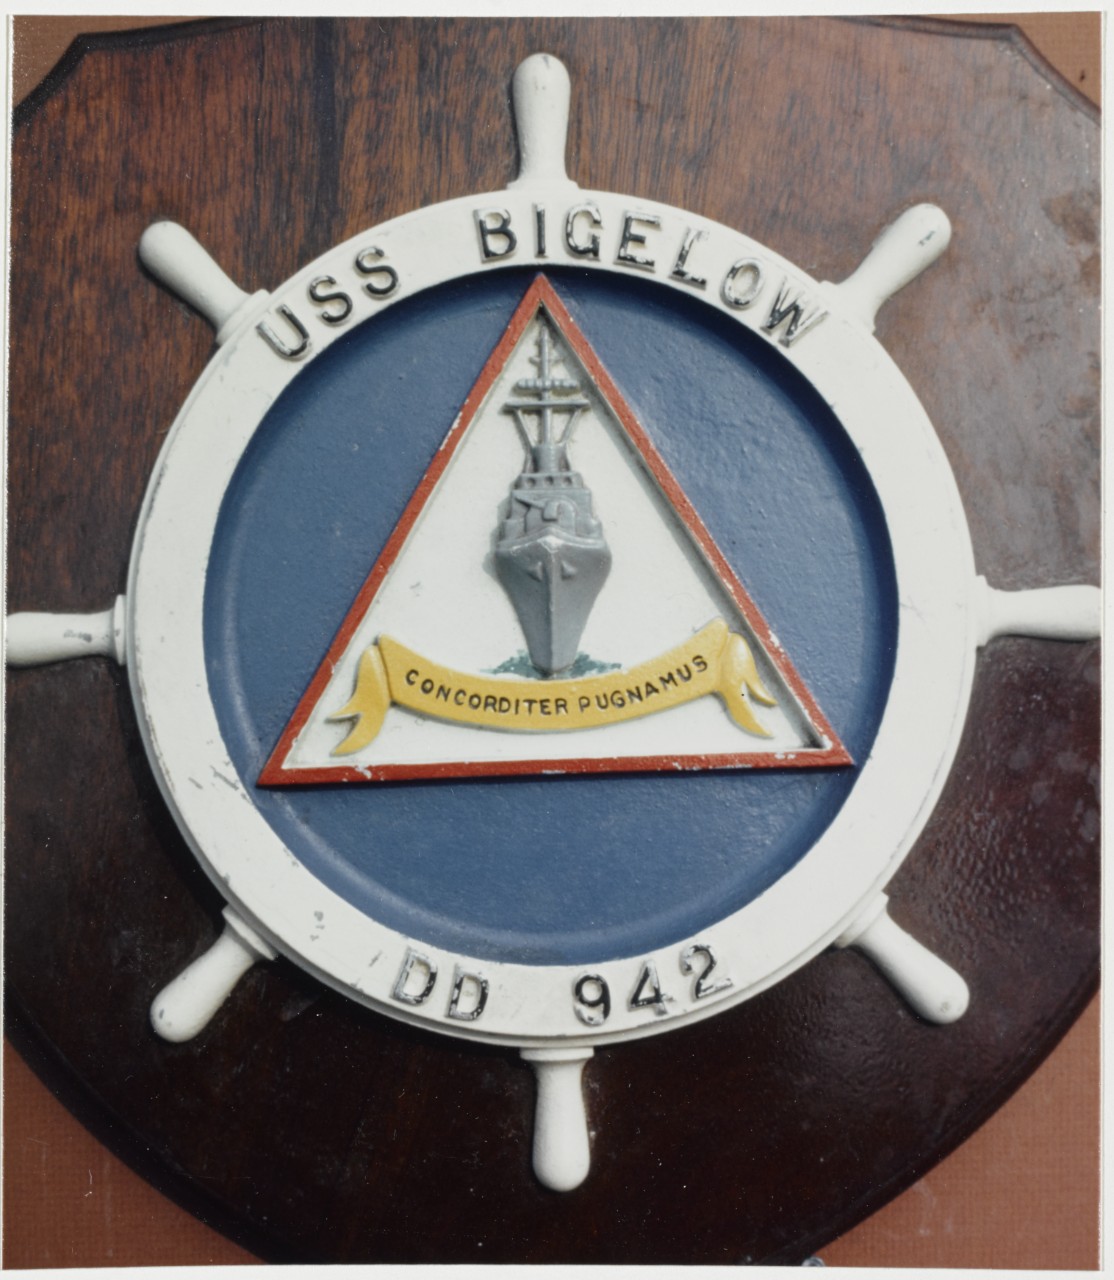 Insignia: USS BIGELOW (DD-942) Plaque received in 1964